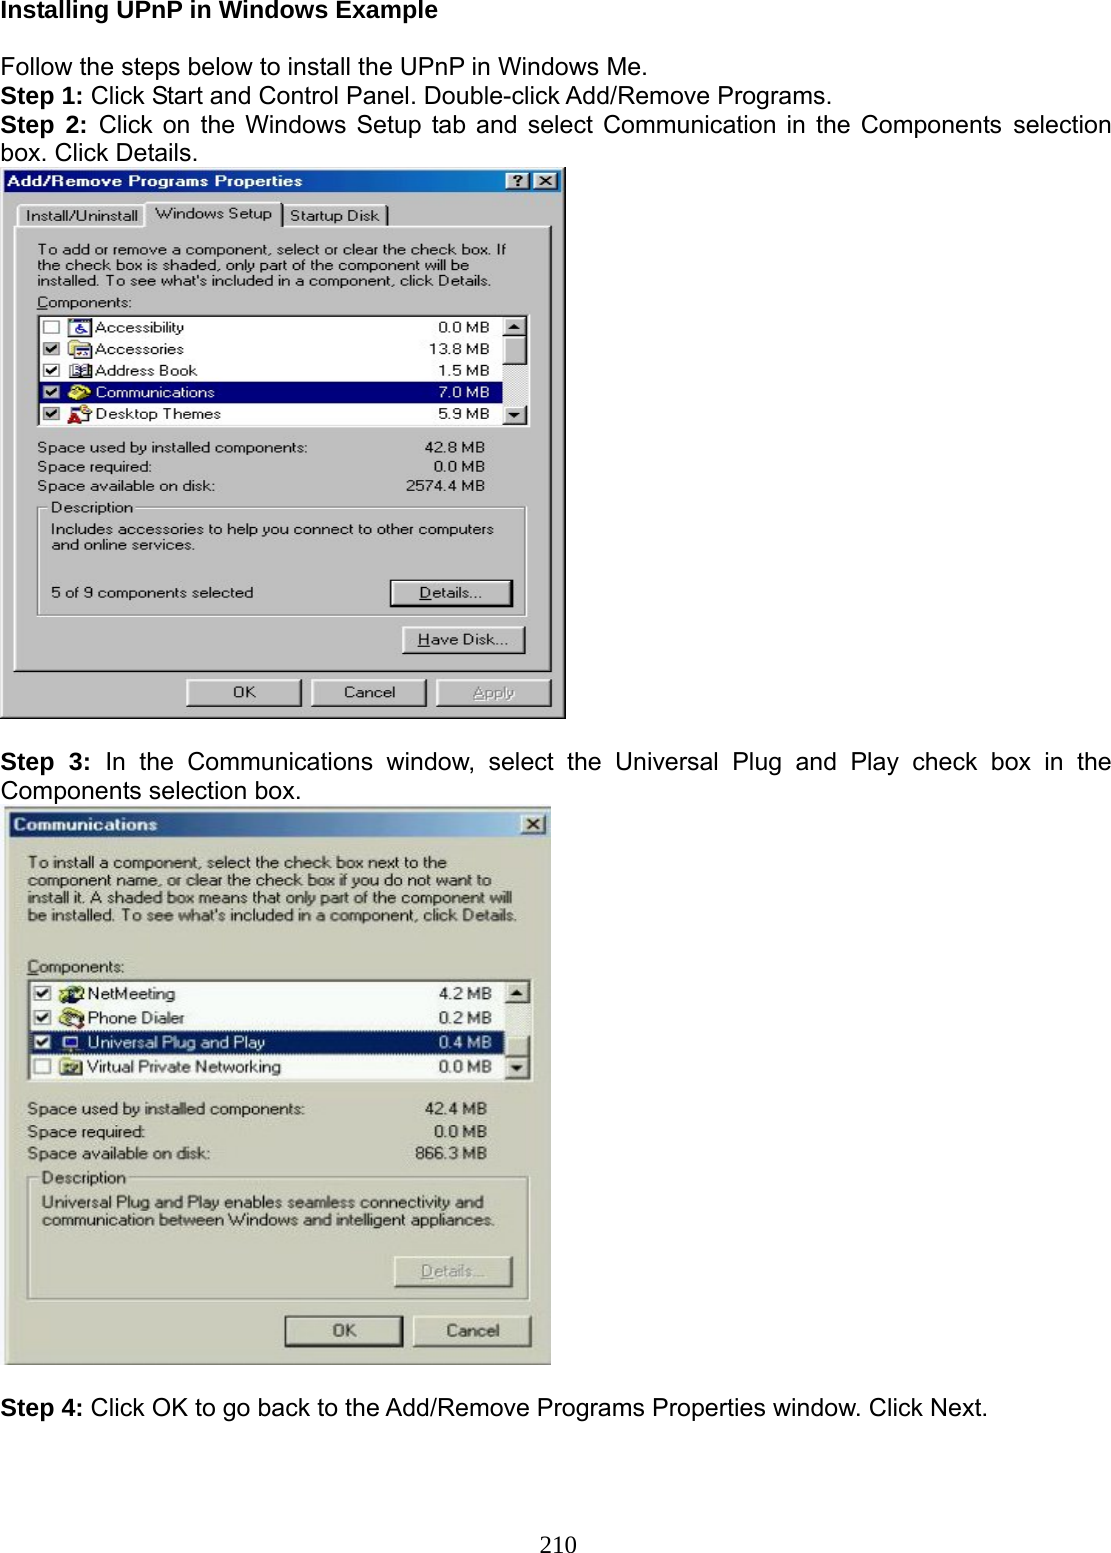 210 Installing UPnP in Windows Example  Follow the steps below to install the UPnP in Windows Me. Step 1: Click Start and Control Panel. Double-click Add/Remove Programs. Step 2: Click on the Windows Setup tab and select Communication in the Components selection box. Click Details.   Step 3: In the Communications window, select the Universal Plug and Play check box in the Components selection box.    Step 4: Click OK to go back to the Add/Remove Programs Properties window. Click Next. 